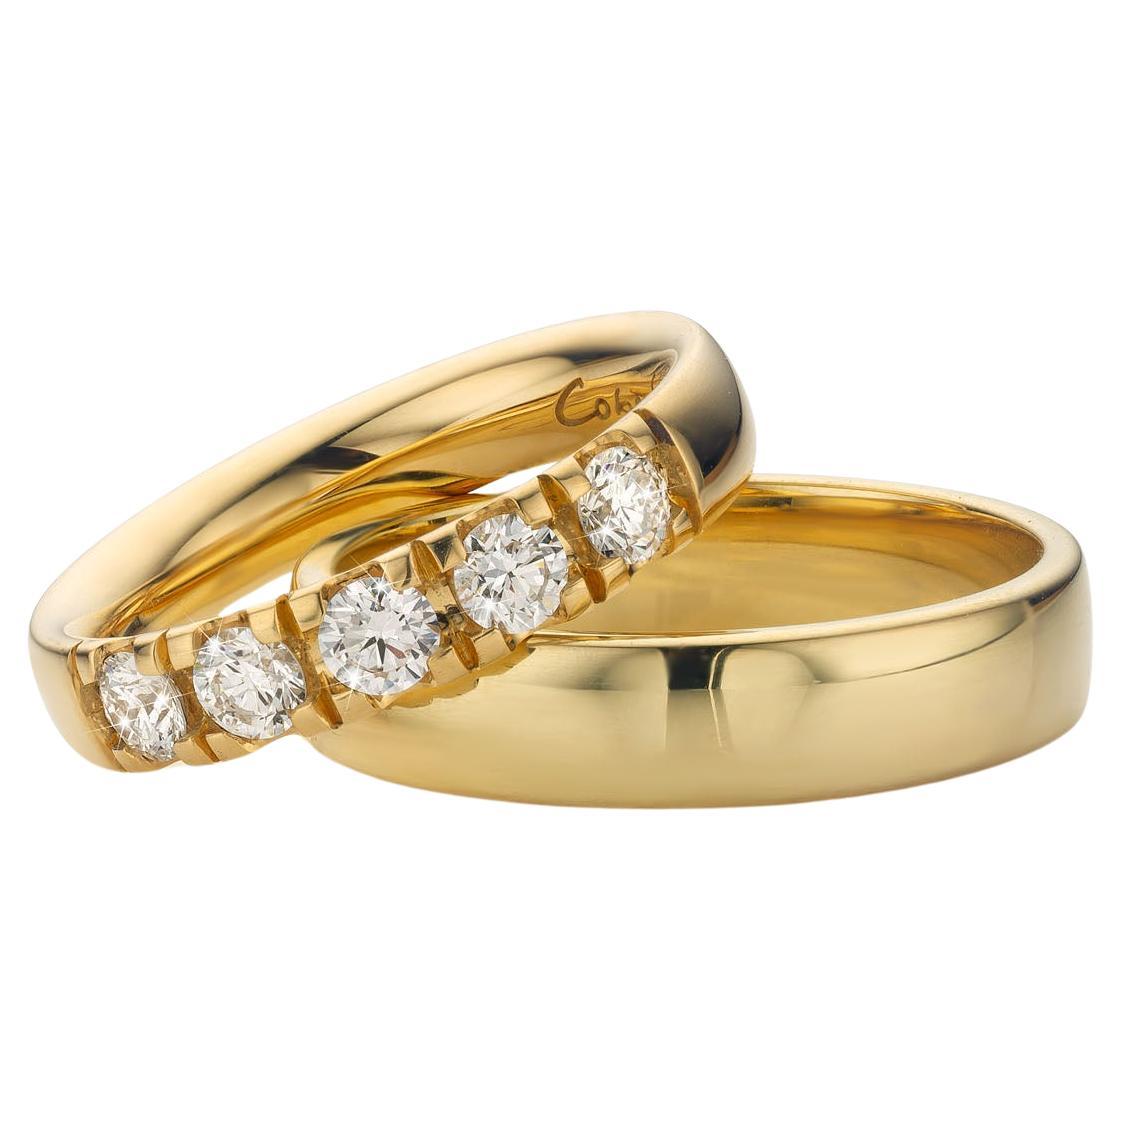 Cober Jewellery yellow gold with 0.15Ct diamonds in ladies Wedding Rings For Sale